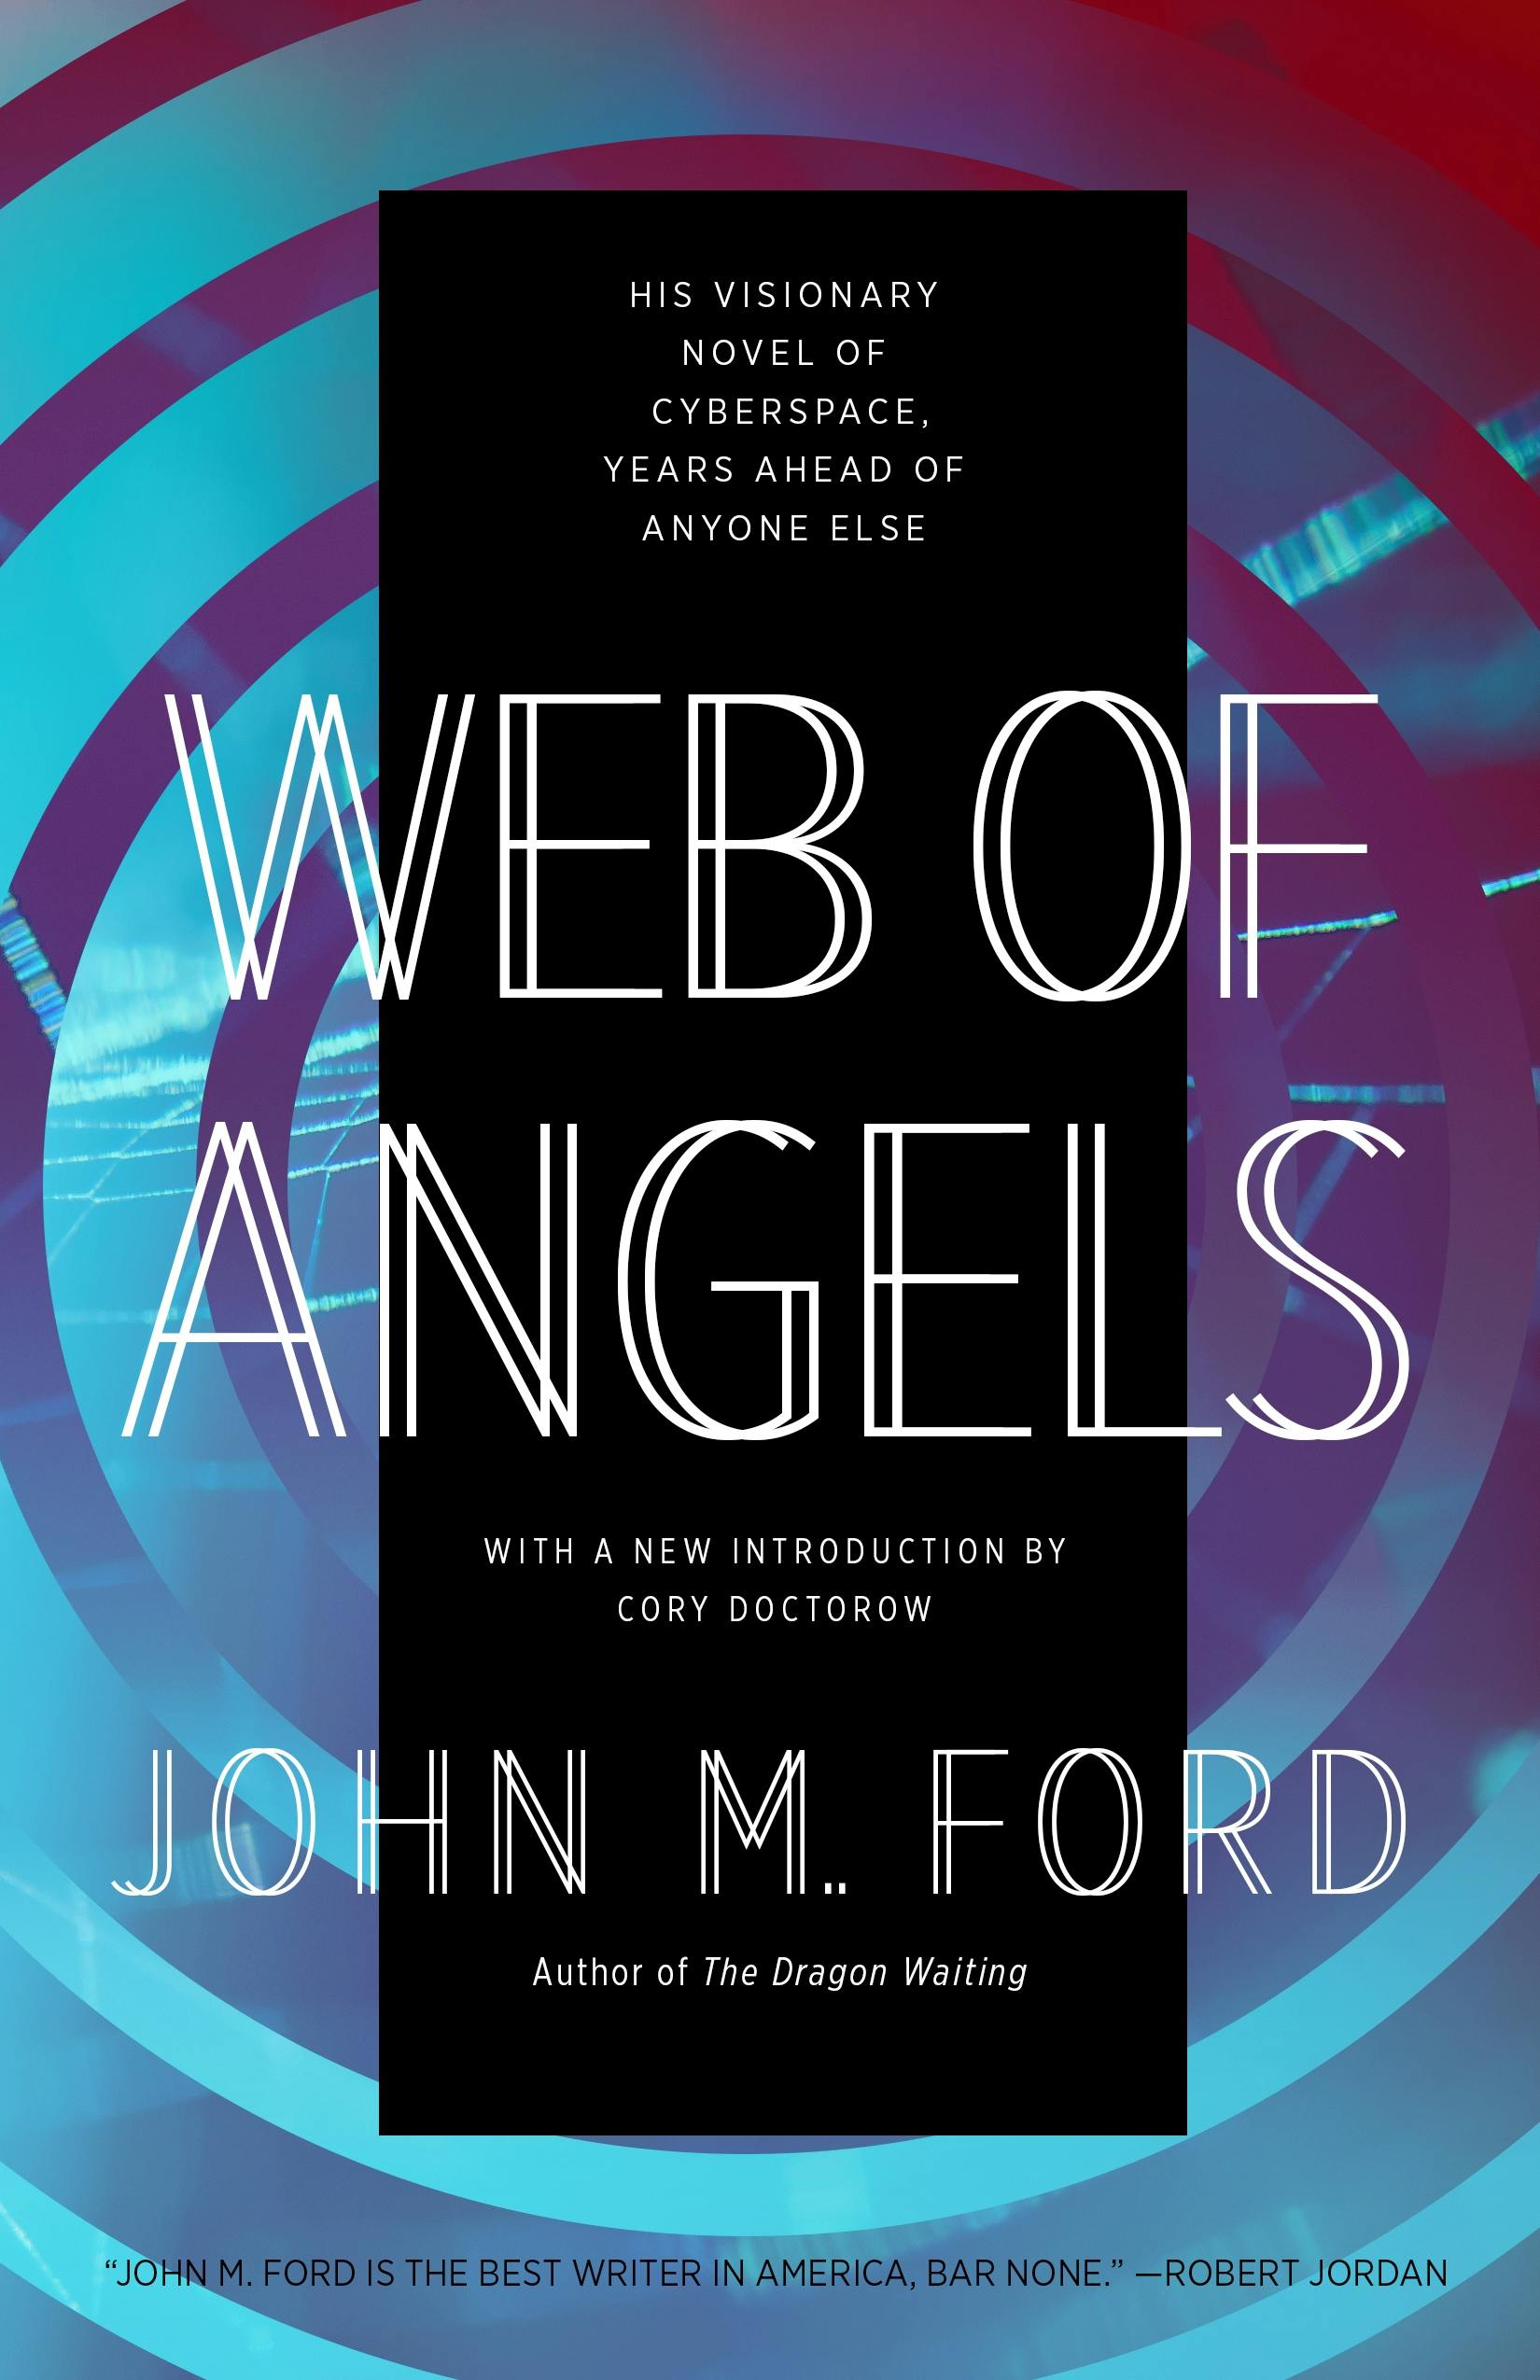 Cover for the book titled as: Web of Angels